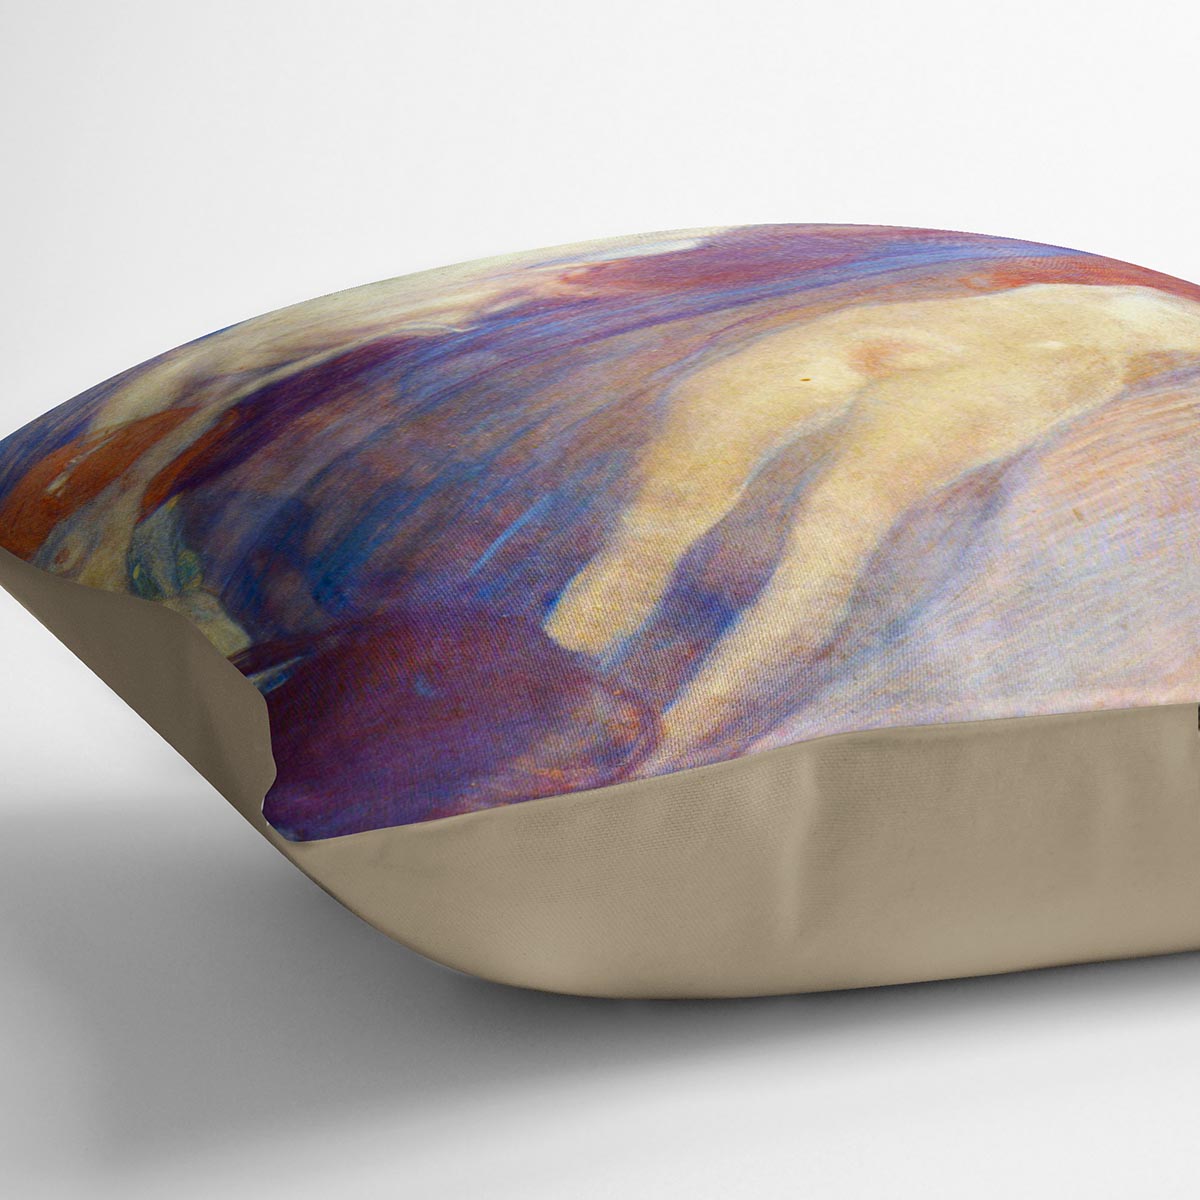 Moving water by Klimt Cushion